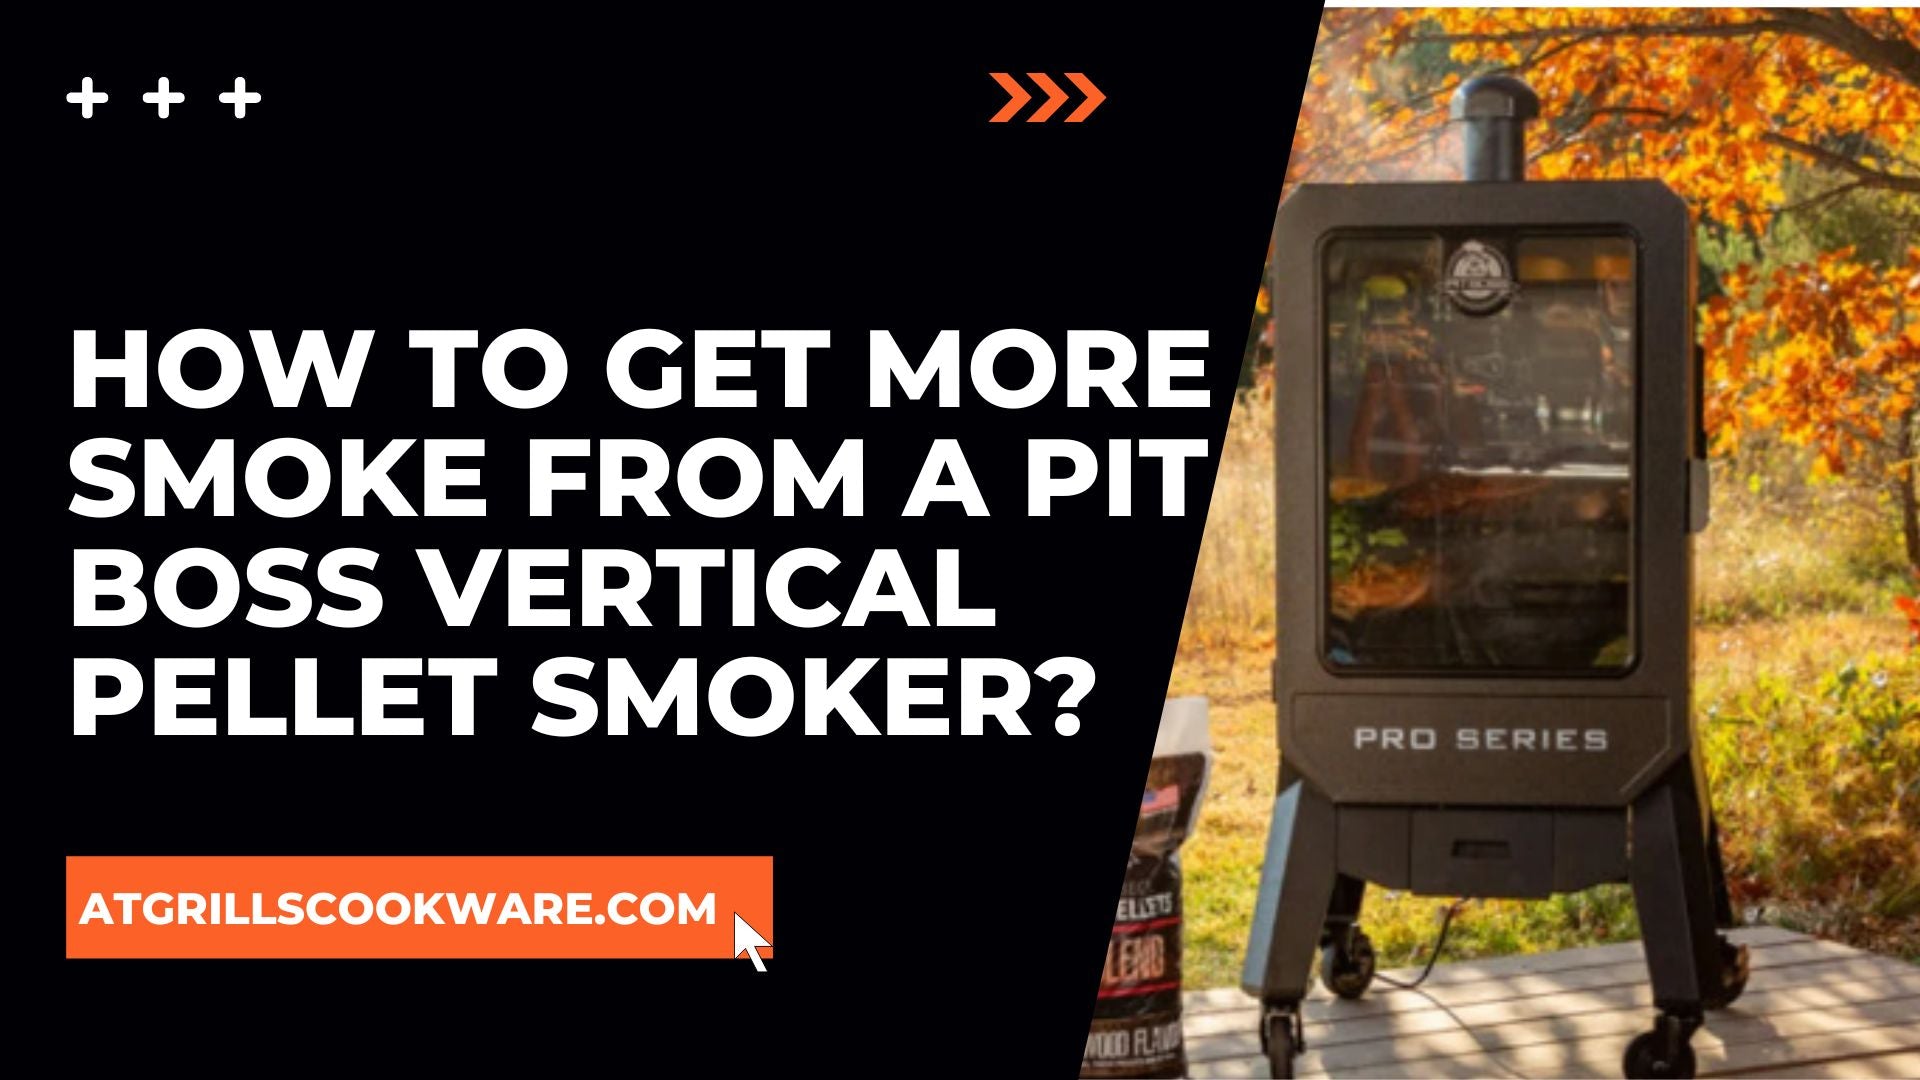 How To Get More Smoke From a Pit Boss Vertical Pellet Smoker